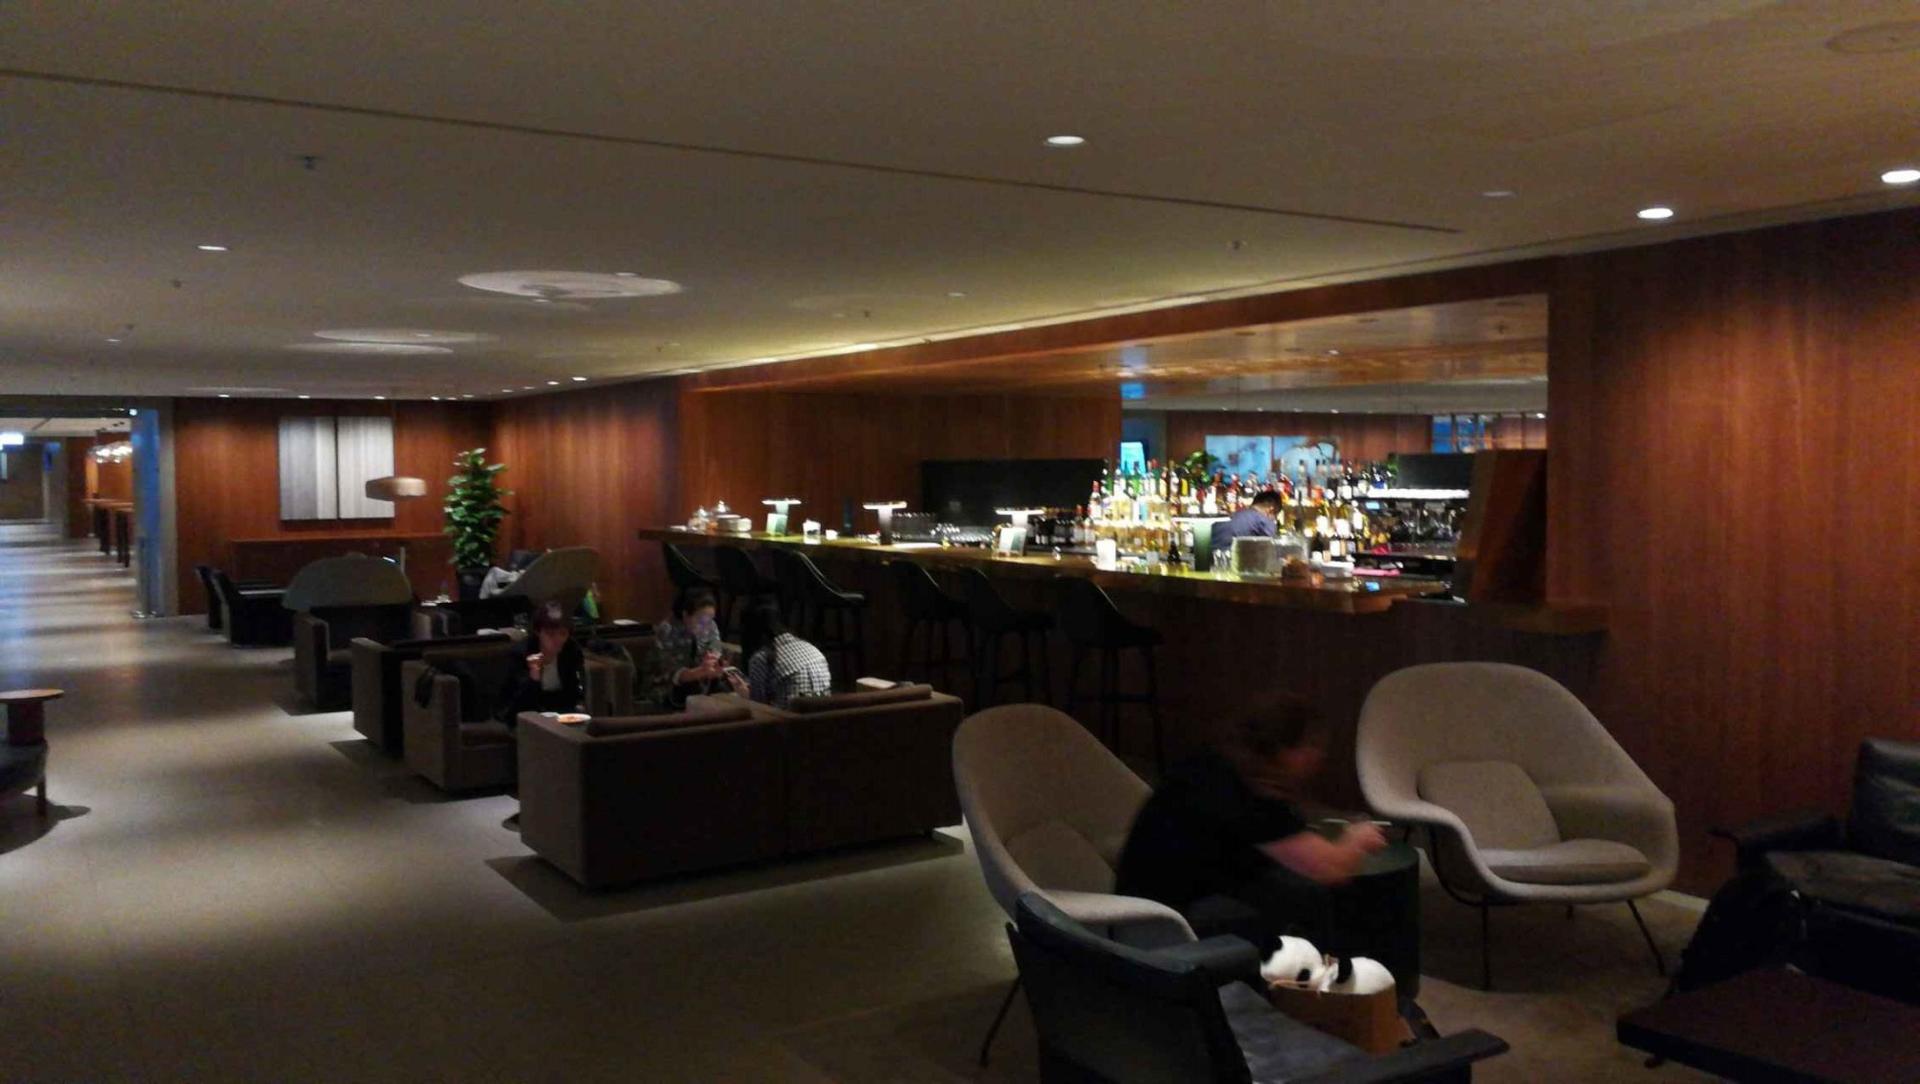 Cathay Pacific The Pier Business Class Lounge image 29 of 61